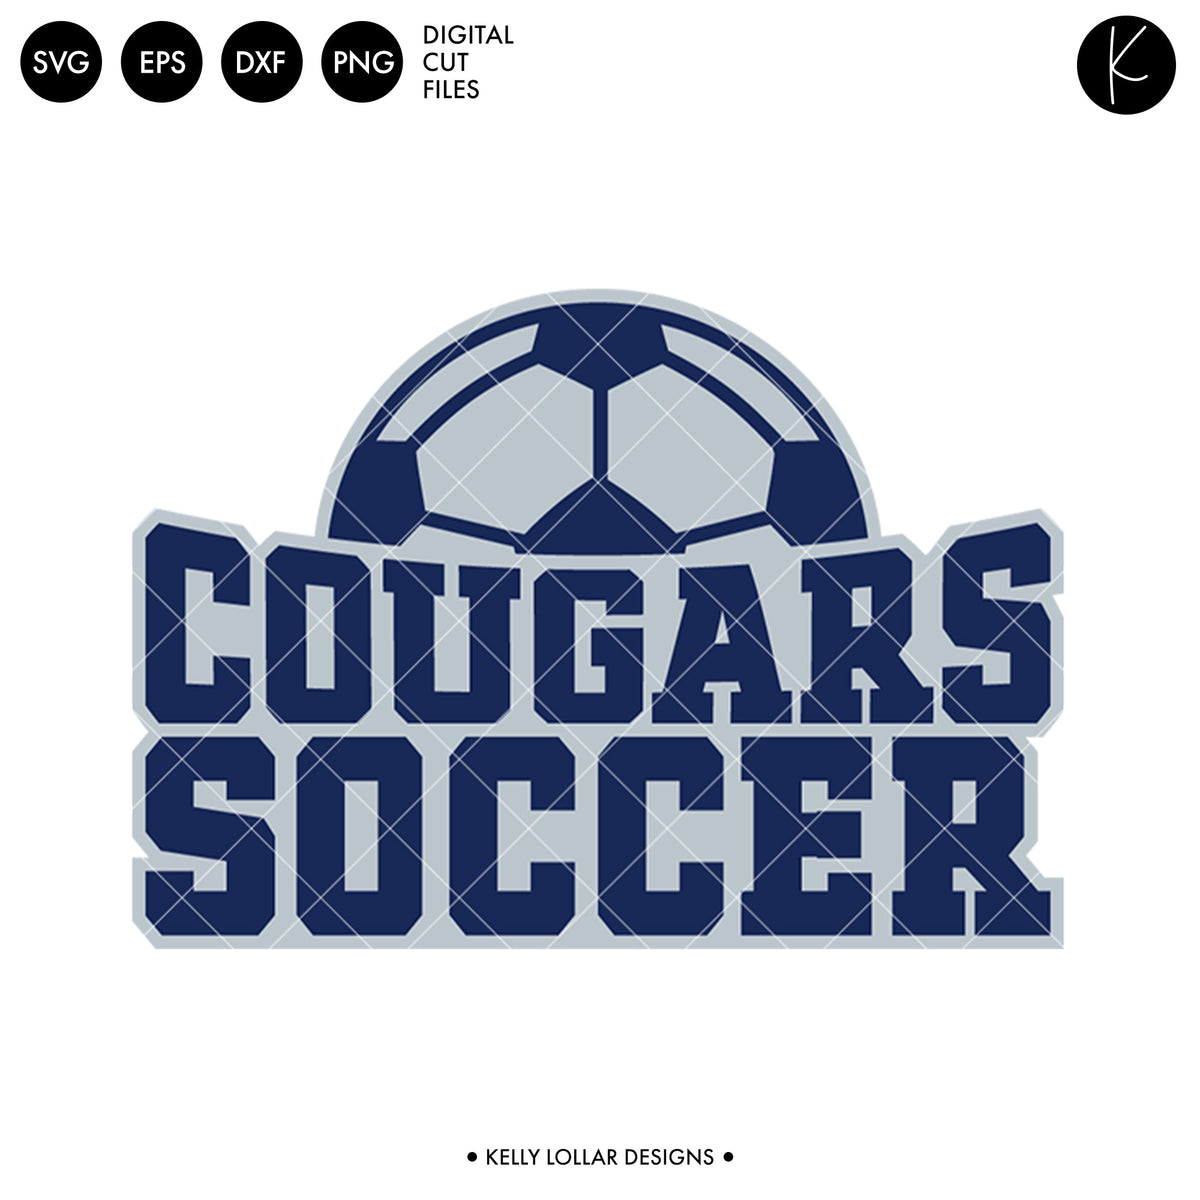 Cougars Soccer and Football Bundle | SVG DXF EPS PNG Cut Files